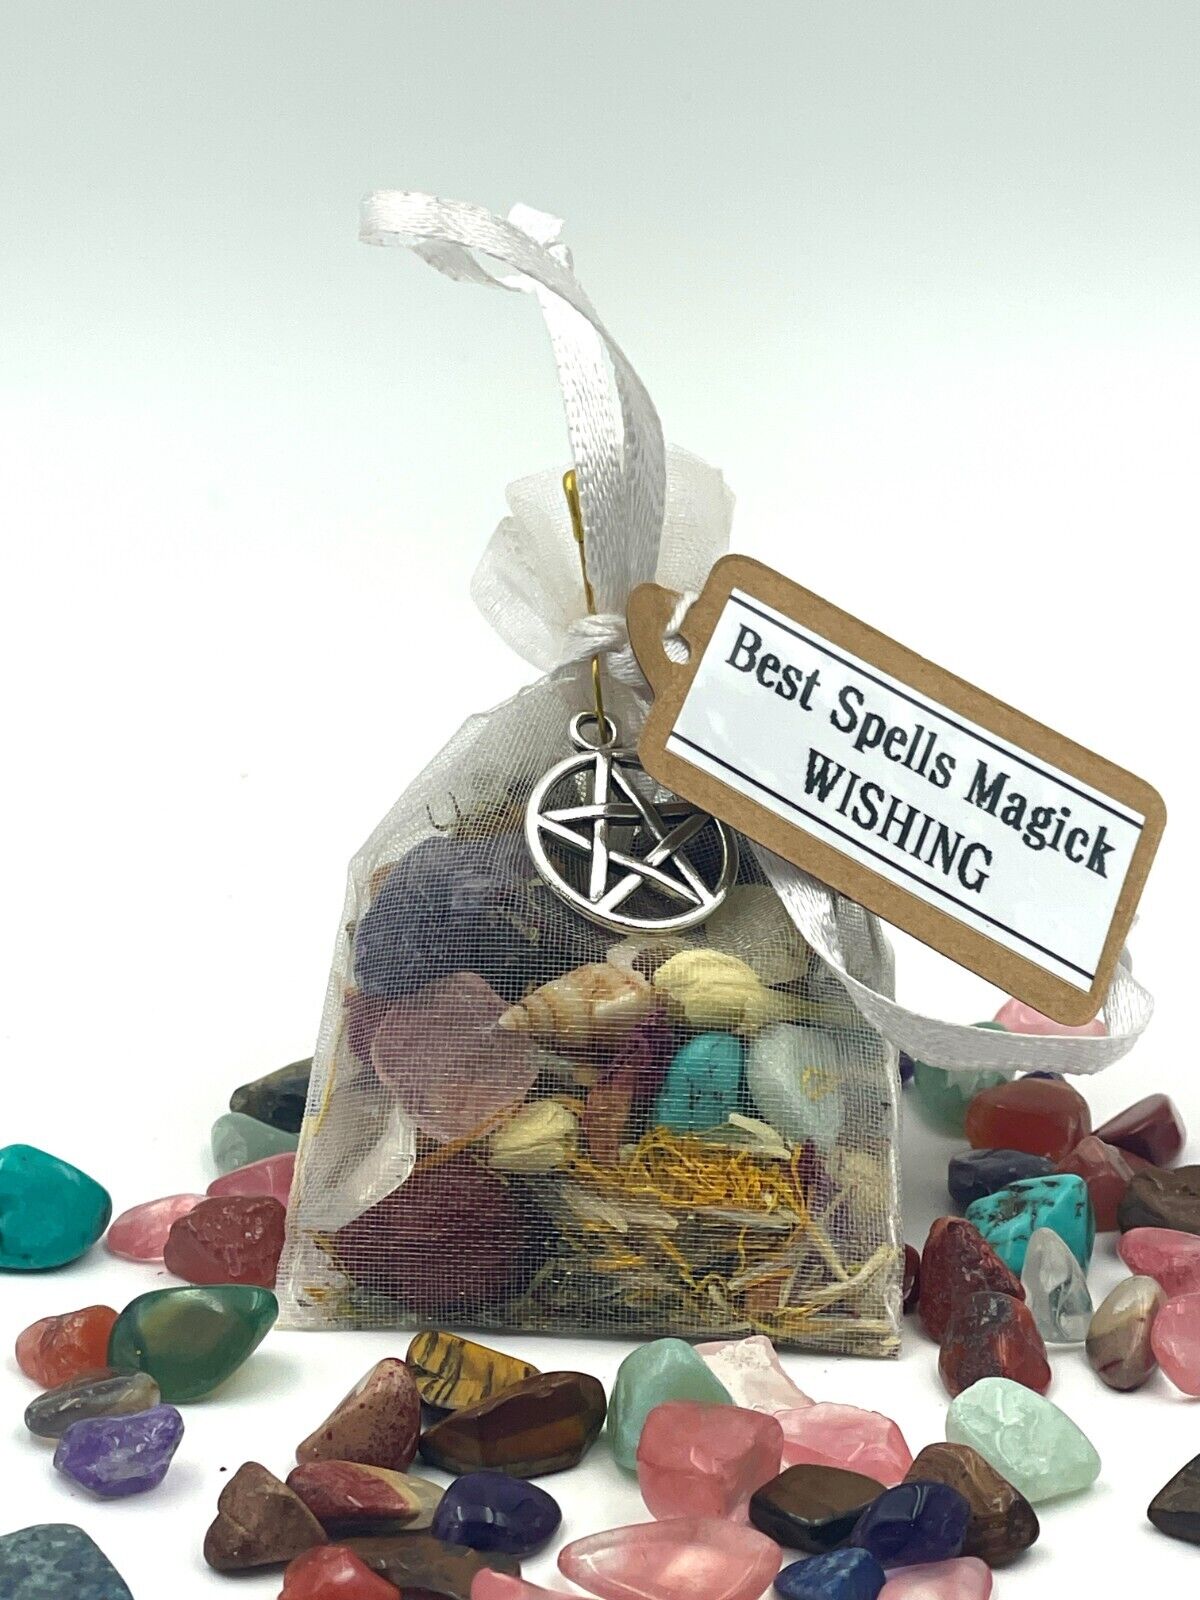 Wishing Crystal and Herbs Intention Spell Mini Mojo Bag by Best Spells Magick